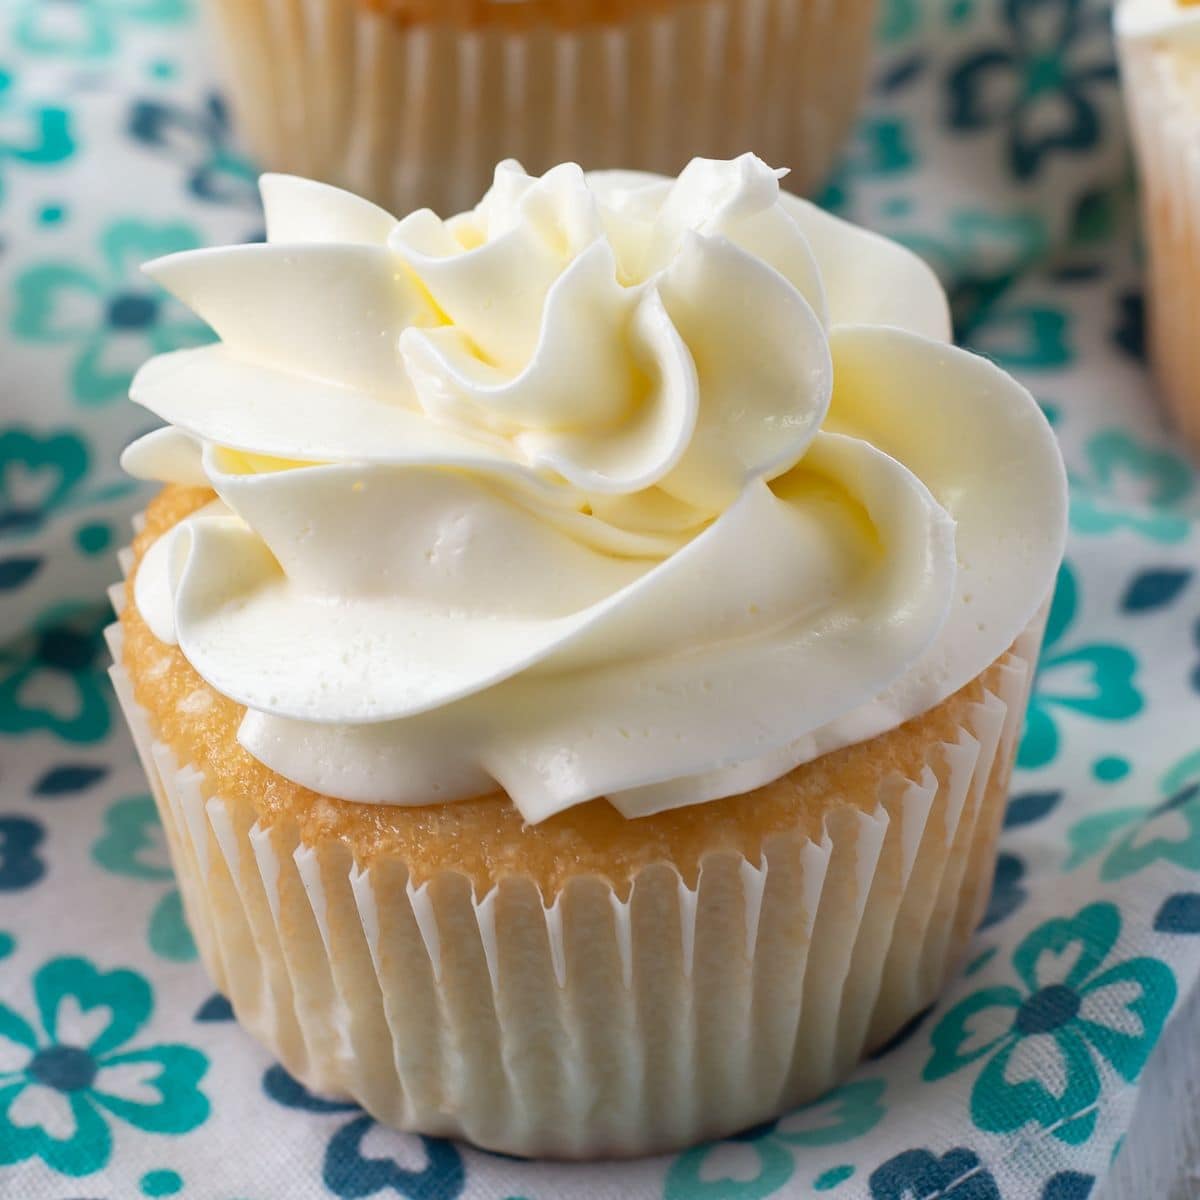 Cupcake Recipes Archives - Flour On My Face